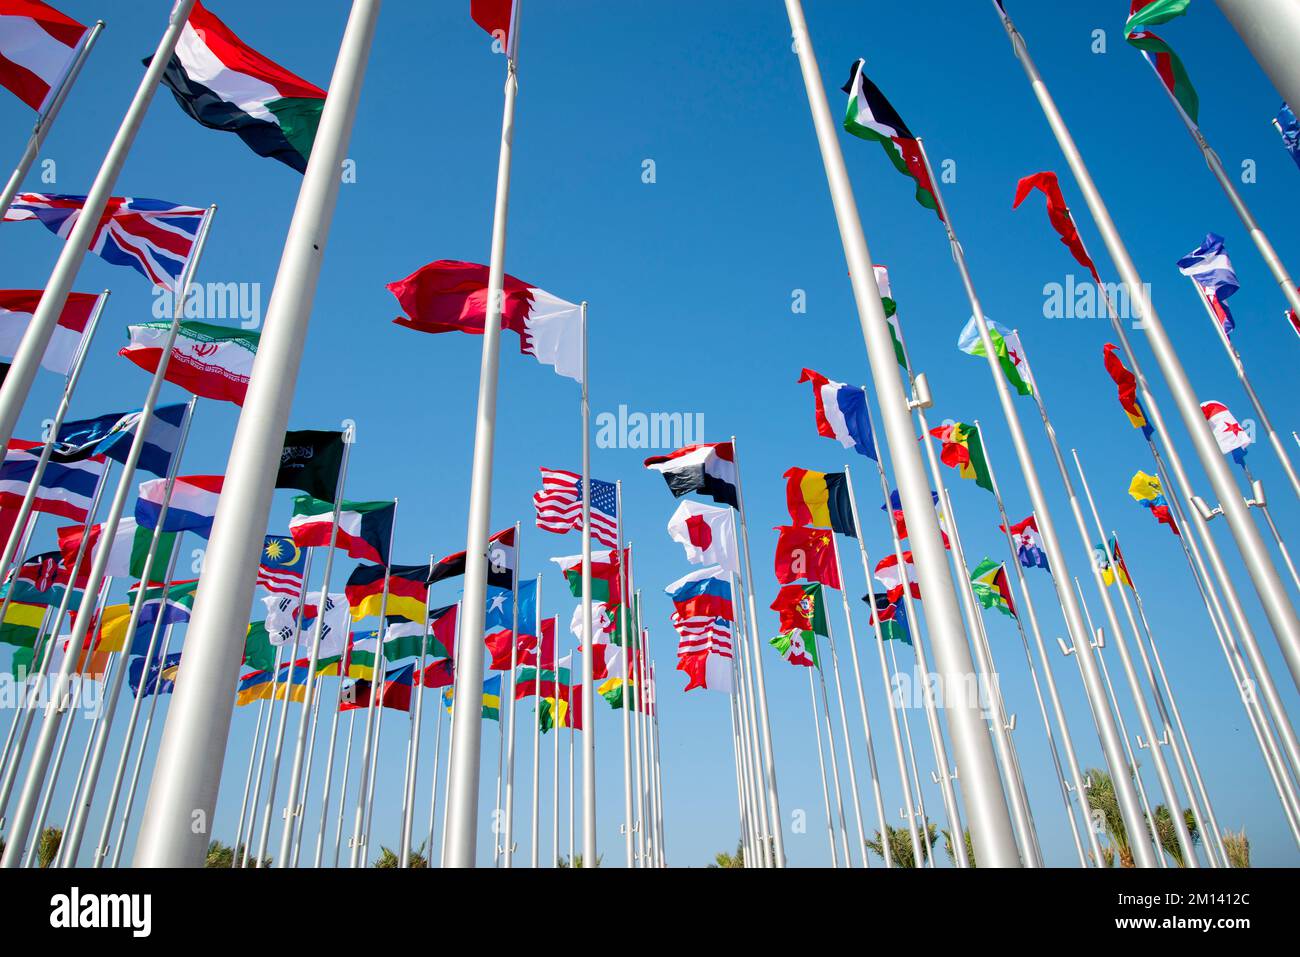 Flags of the World - Qatar Stock Photo